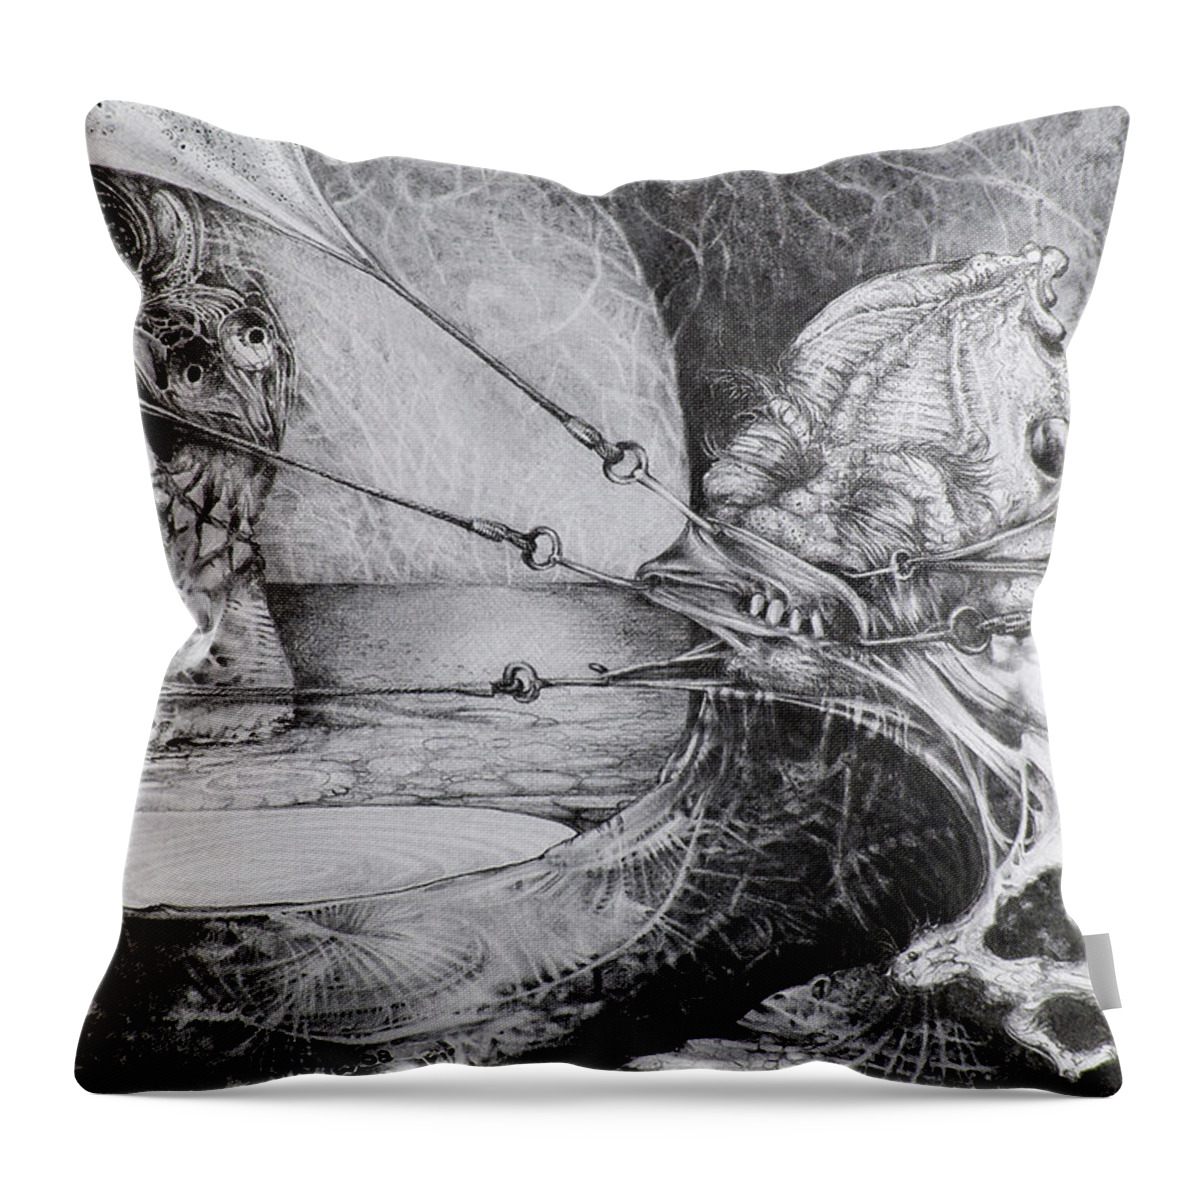 Surrealism Throw Pillow featuring the drawing General Peckerwood In Purgatory by Otto Rapp